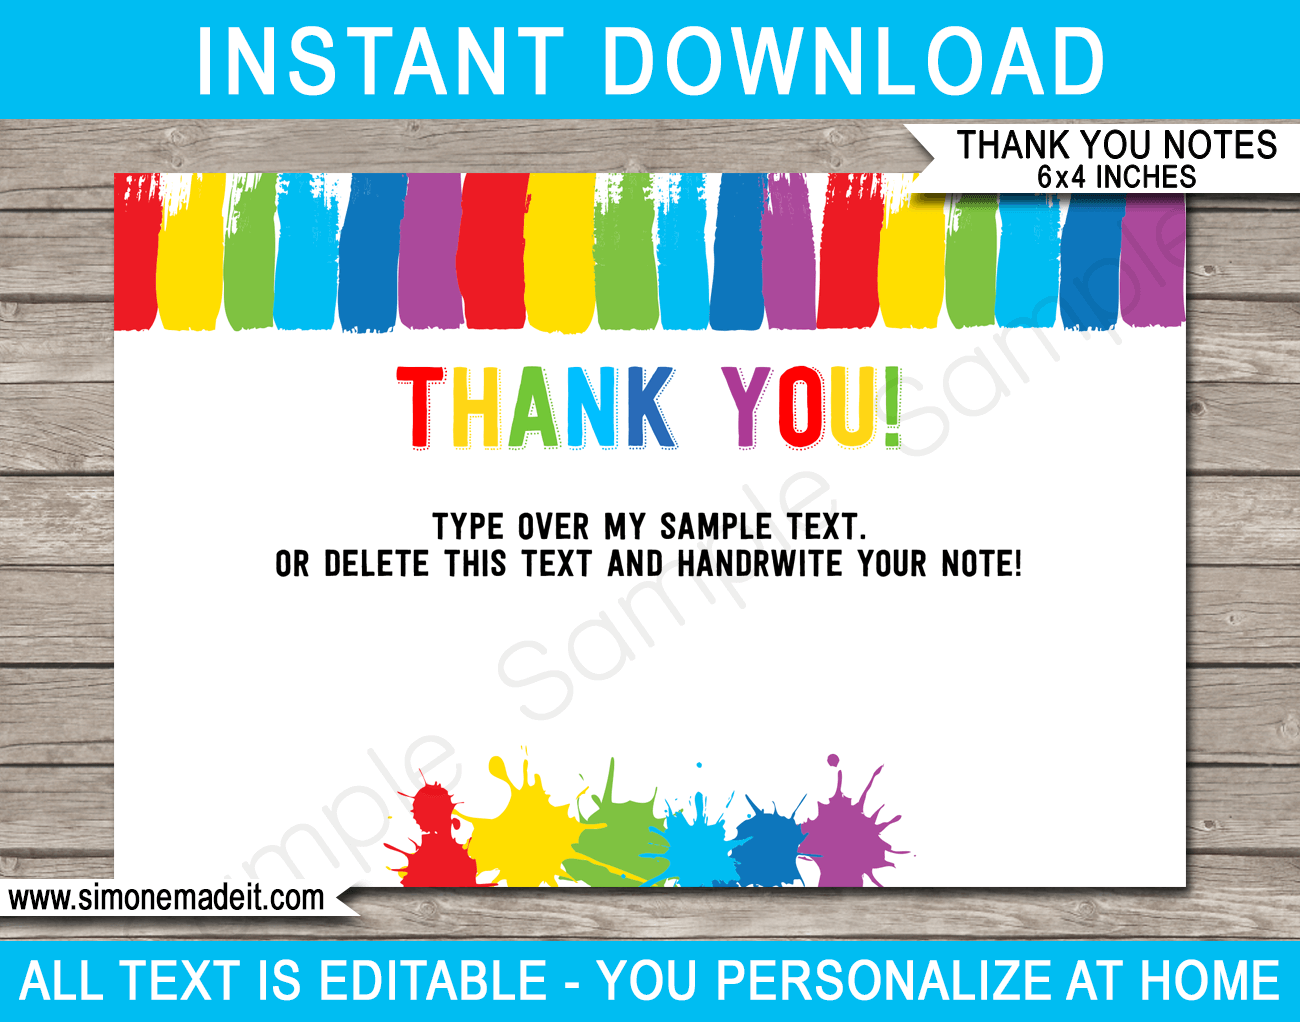 Printable Art Party Thank You Cards - Favor Tags - Art or Paint Birthday Party theme - Editable Template - Instant Download via simonemadeit.com